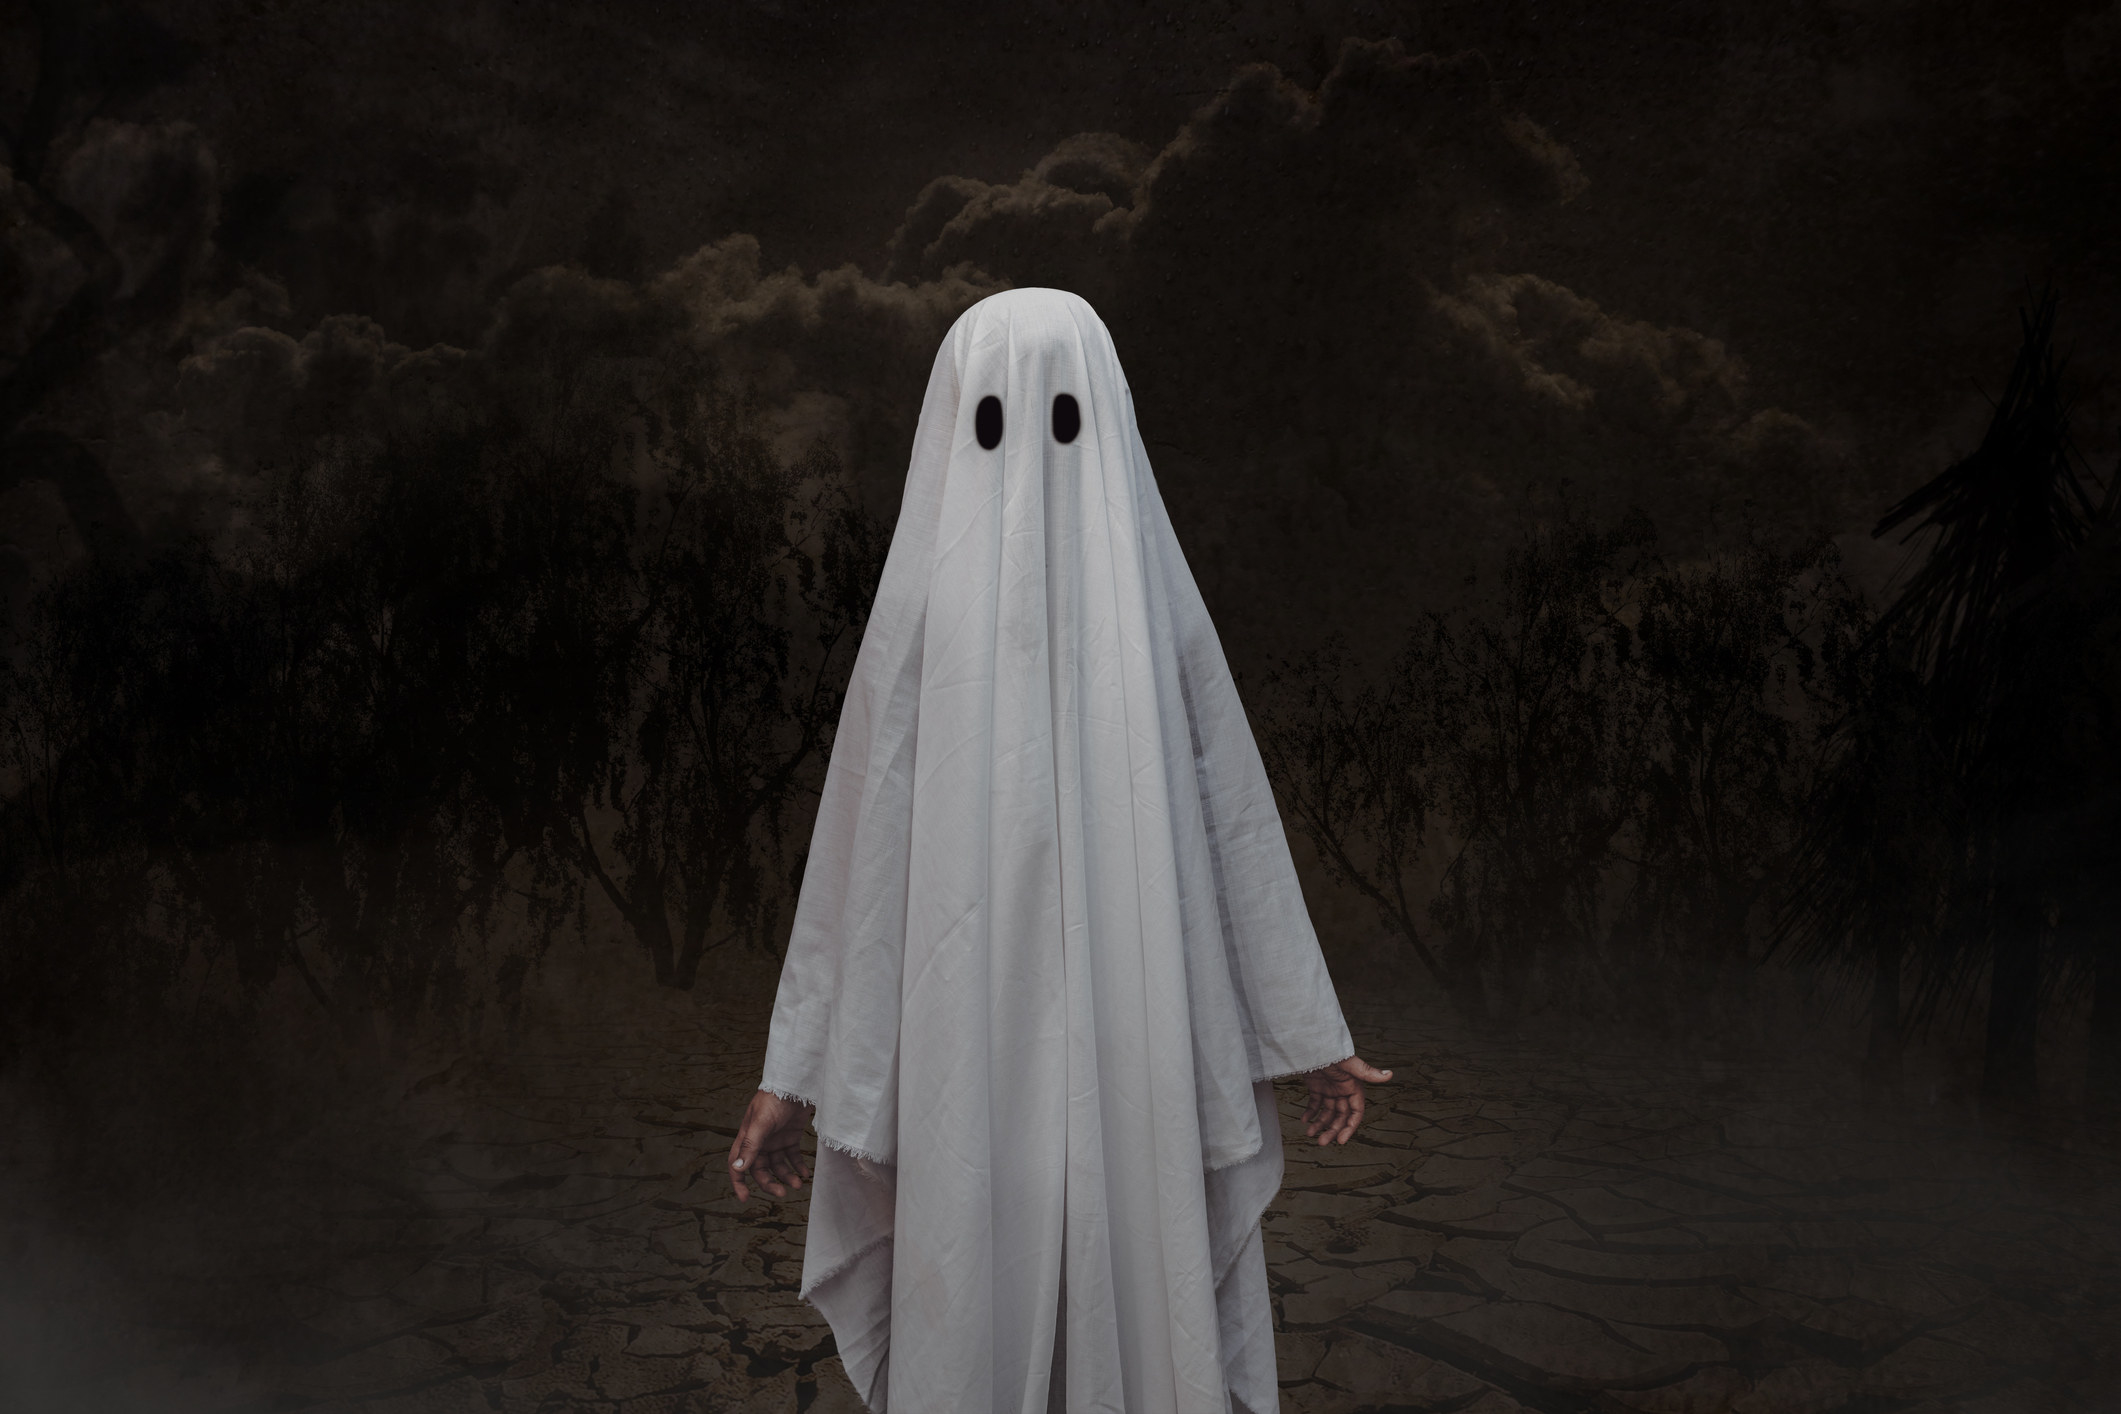 A person dressed as a ghost